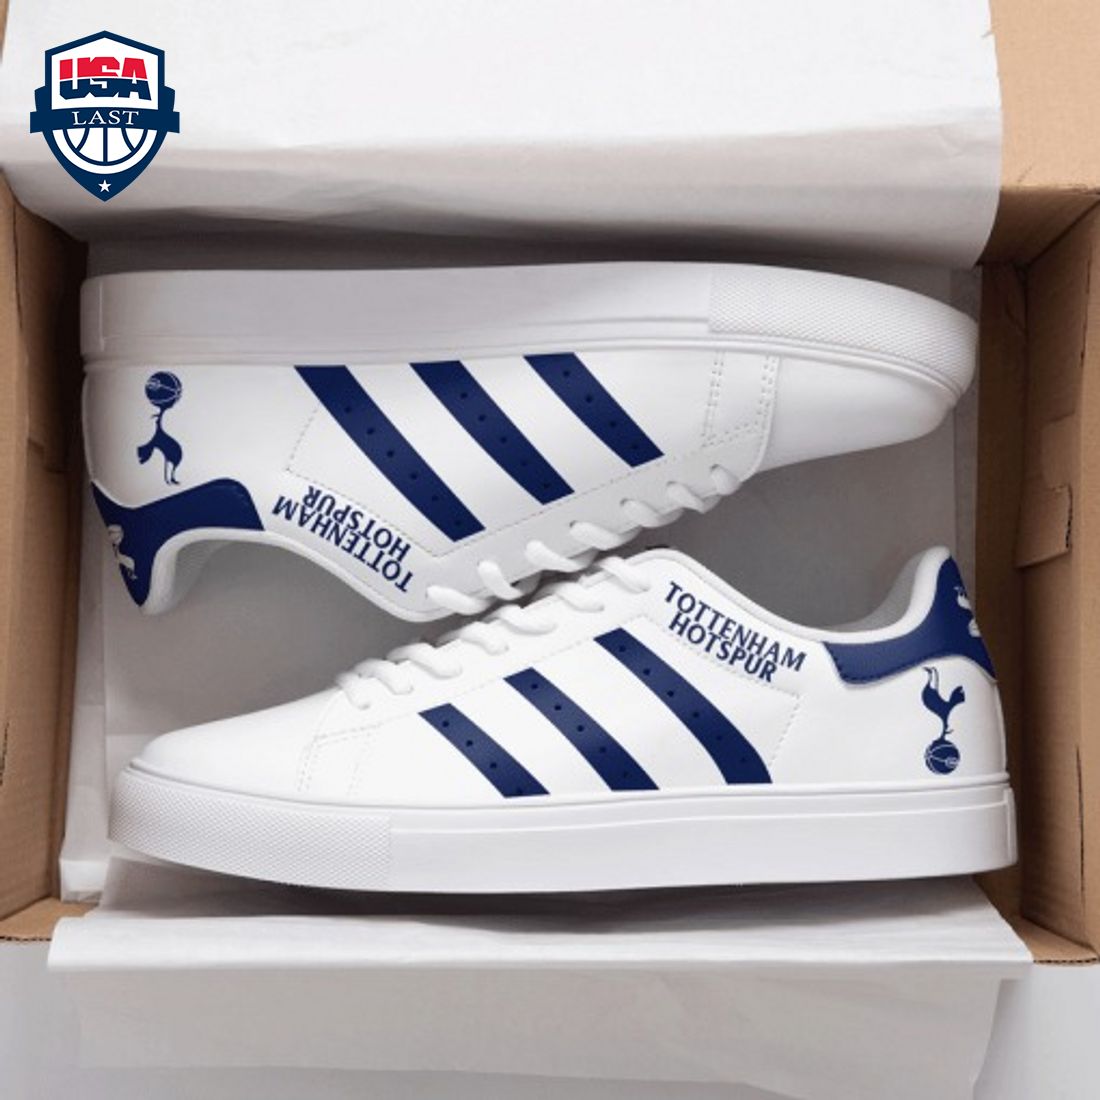 Tottenham Hotspur FC Navy Stripes Stan Smith Low Top Shoes - Amazing Pic